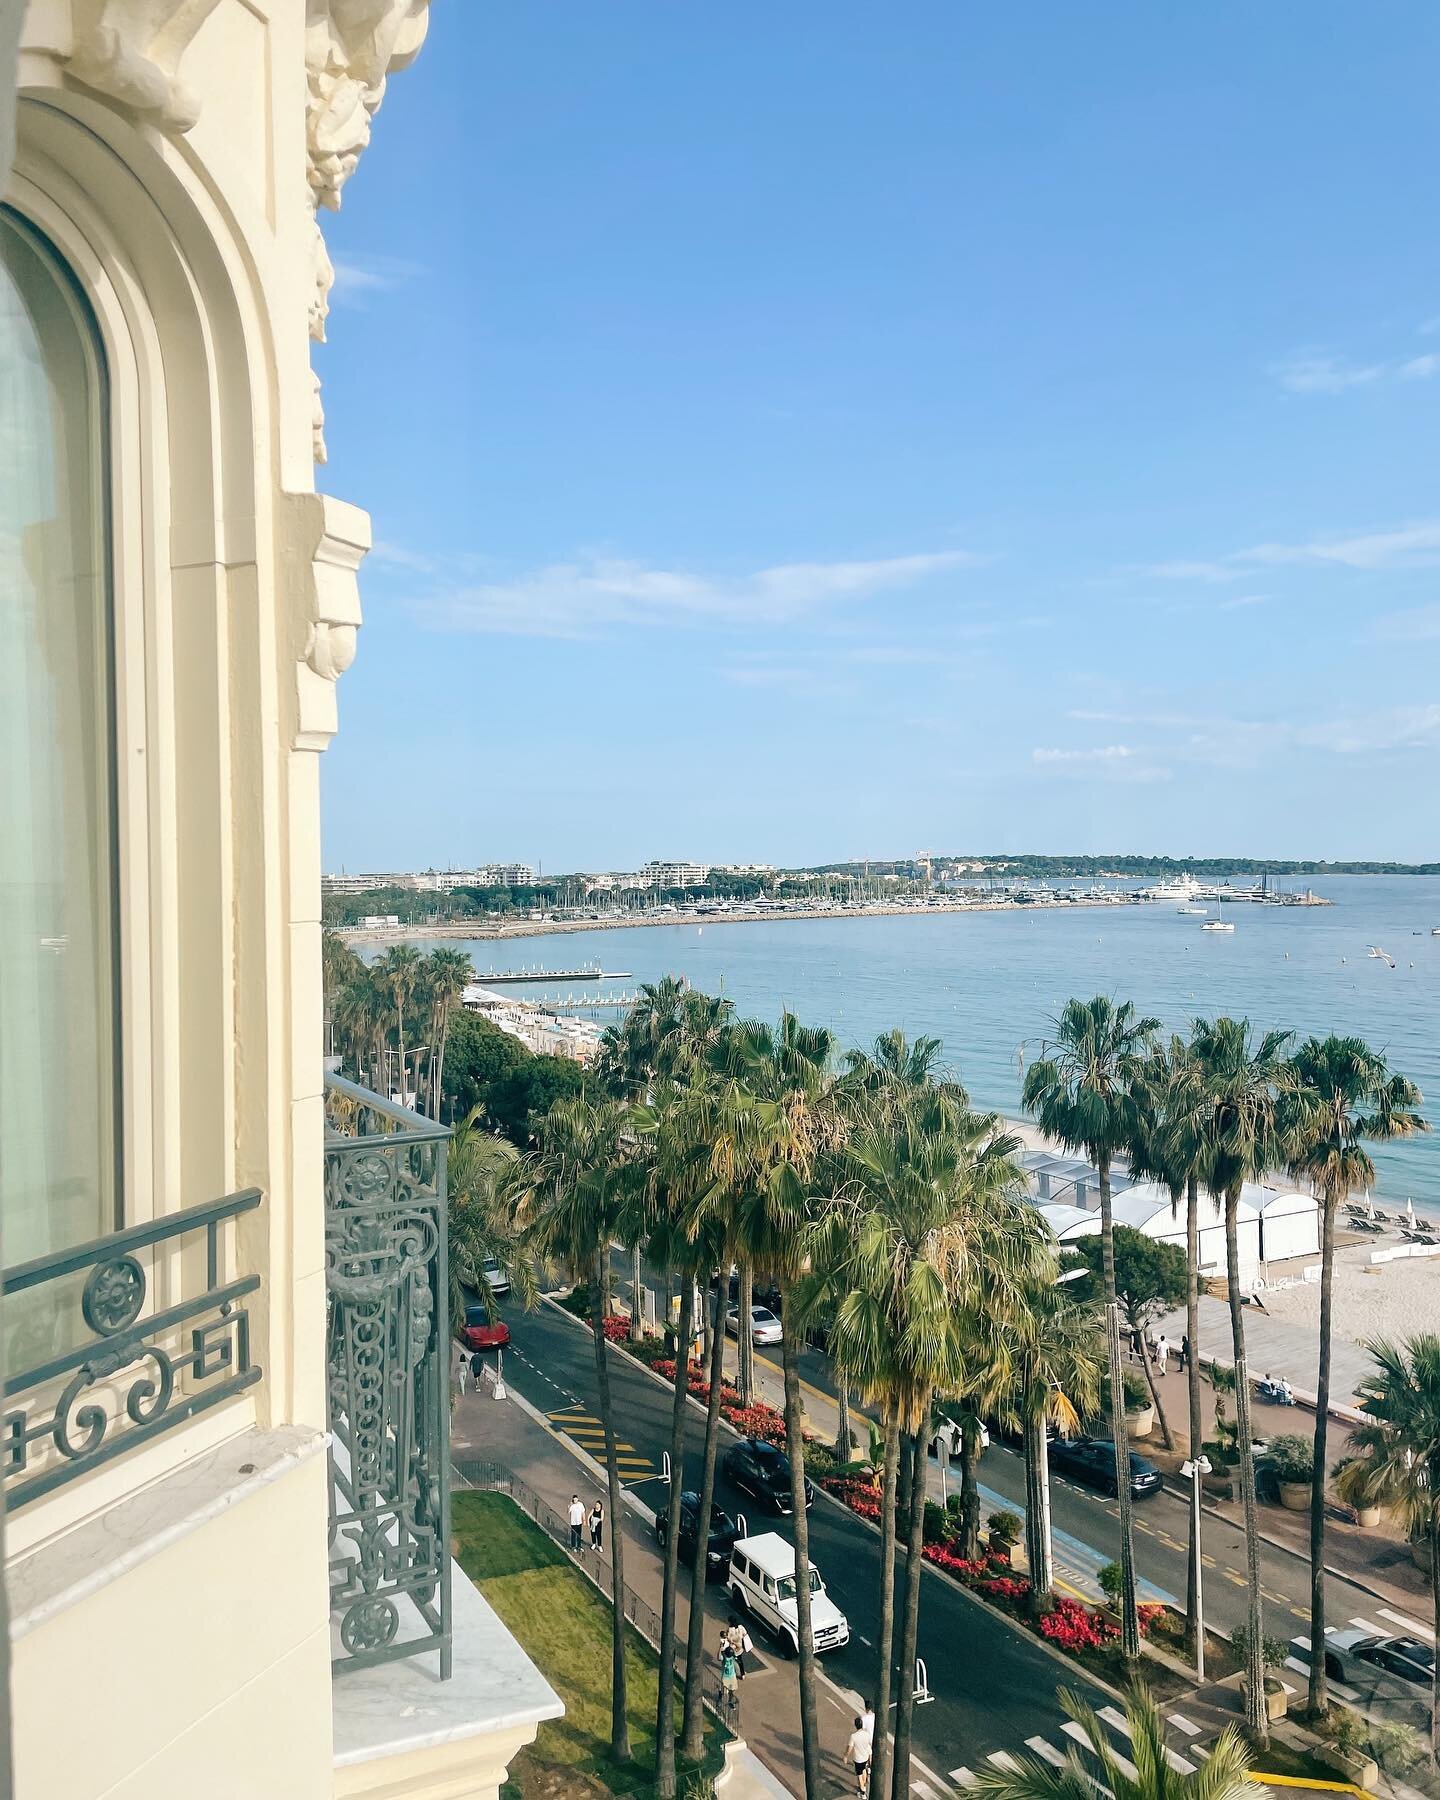 Lived out our European Summer dreams here at the completely redone Carlton Cannes! 
☀️ 
STAY: Carlton Cannes has just completed a full renovation to make the rooms bigger, added more suites, and even quadrupled their staff!  Service is impeccable and